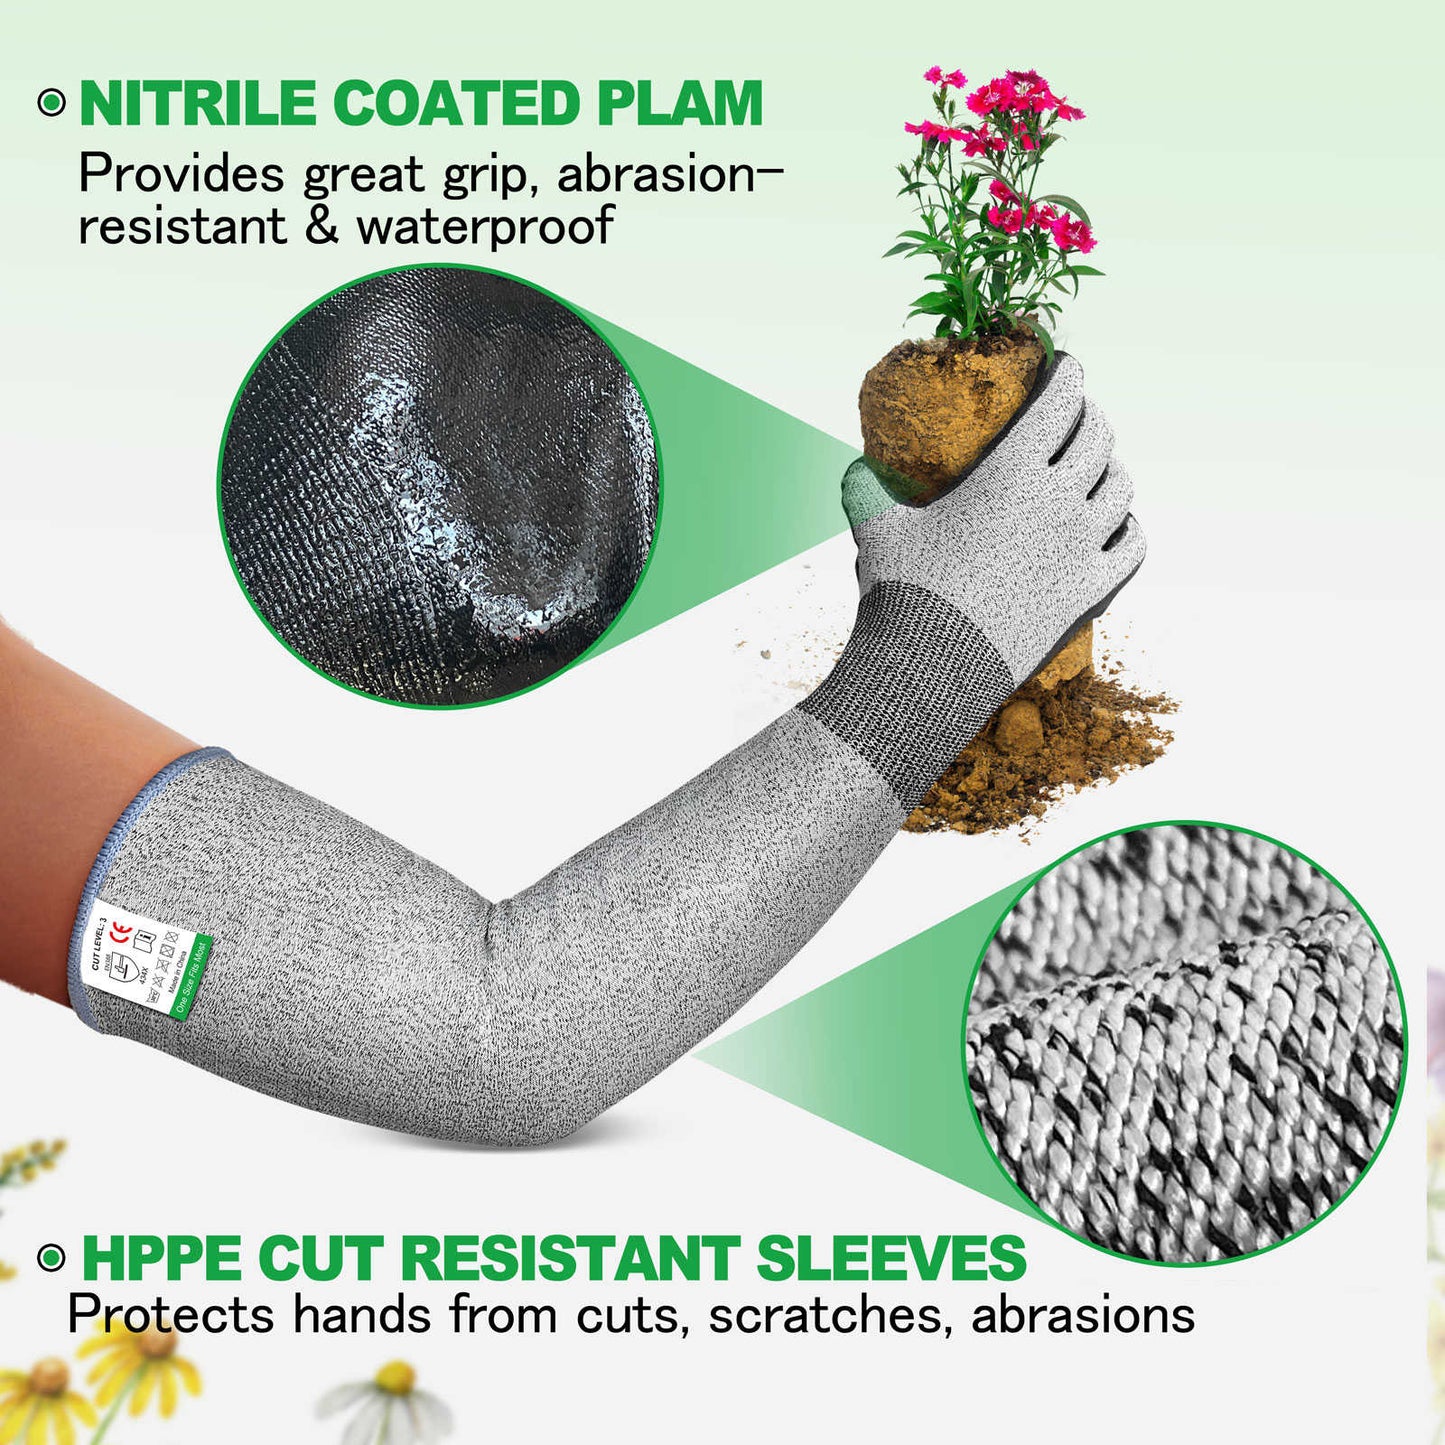 EvridWear Long Gardening Gloves Cut Resistant Sleeves with Anti-slip Nitrile Coated Palm